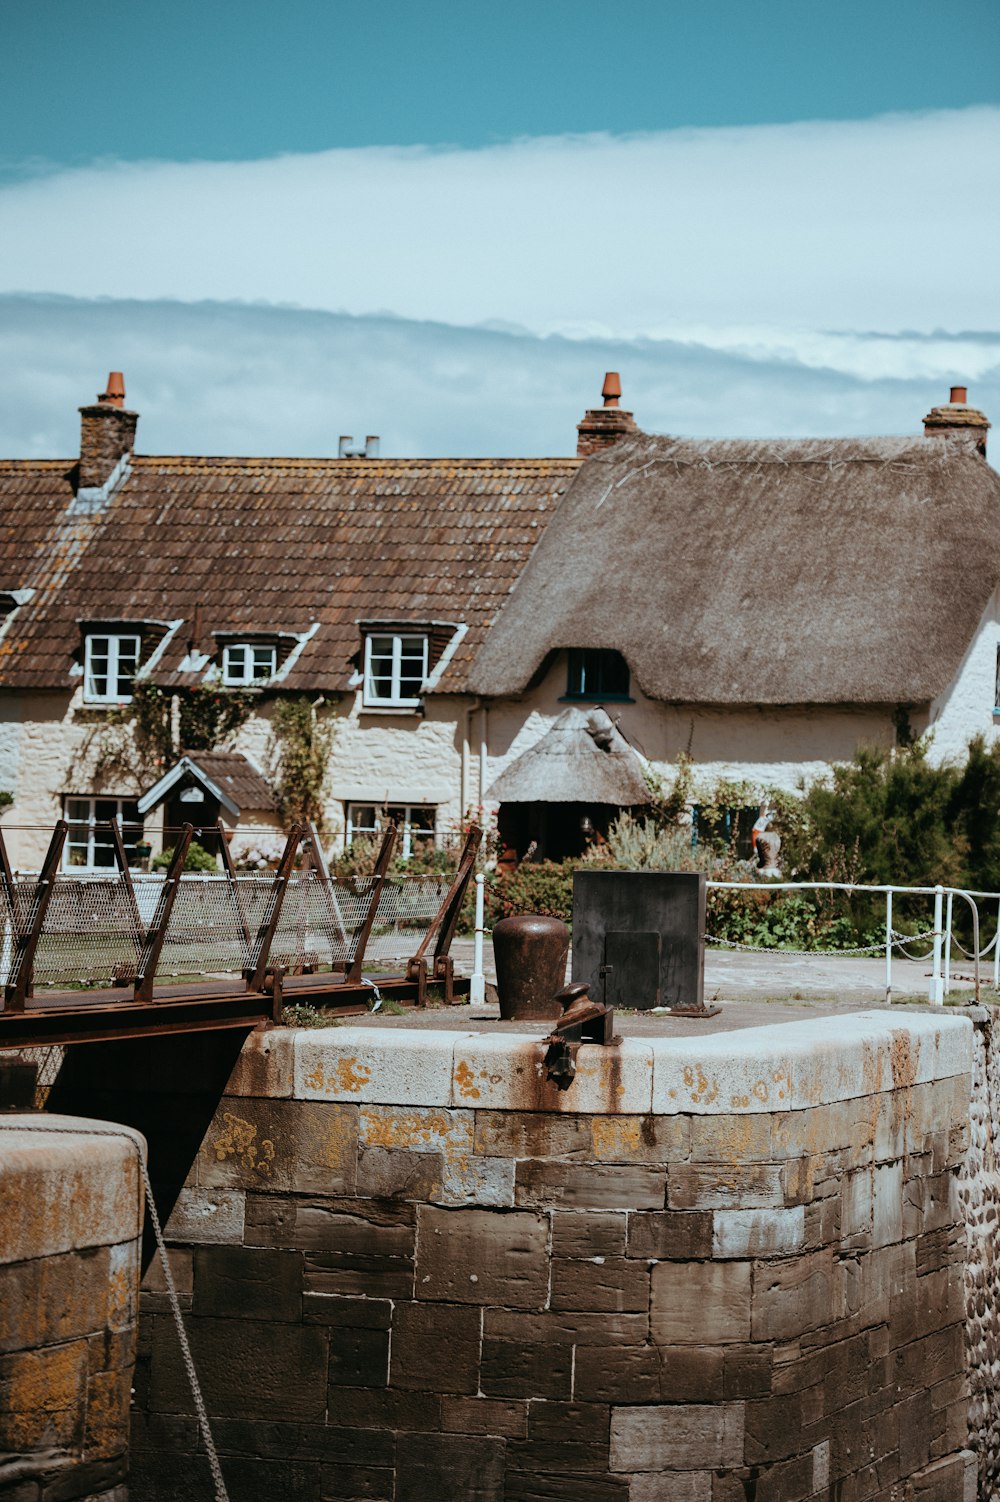 a house with a thatched roof next to a body of water